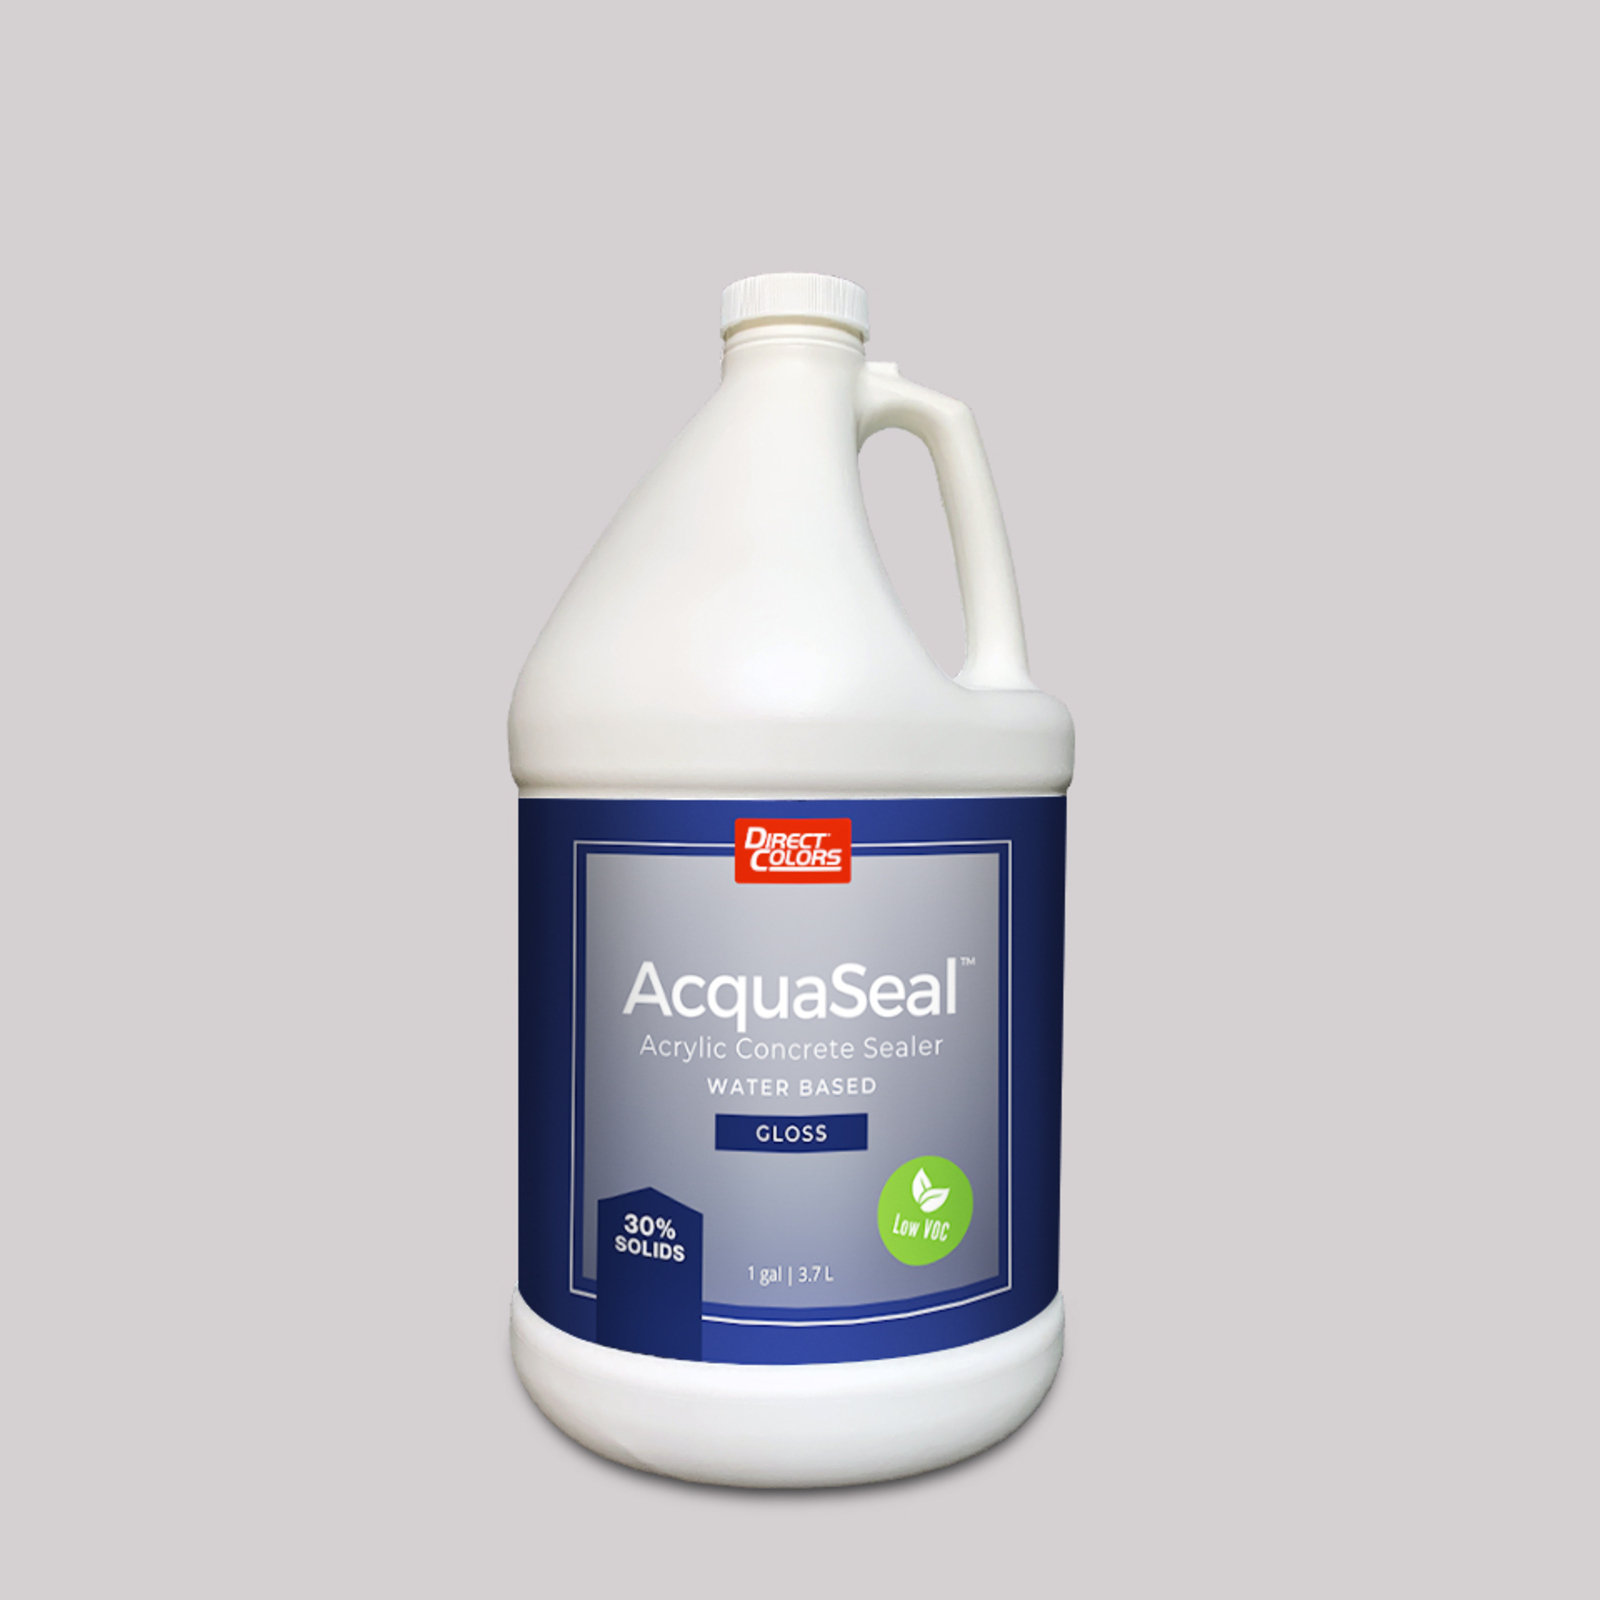 Sauna Seal Once - 1 Gallon  very low VOC NON-Toxic Waterproof